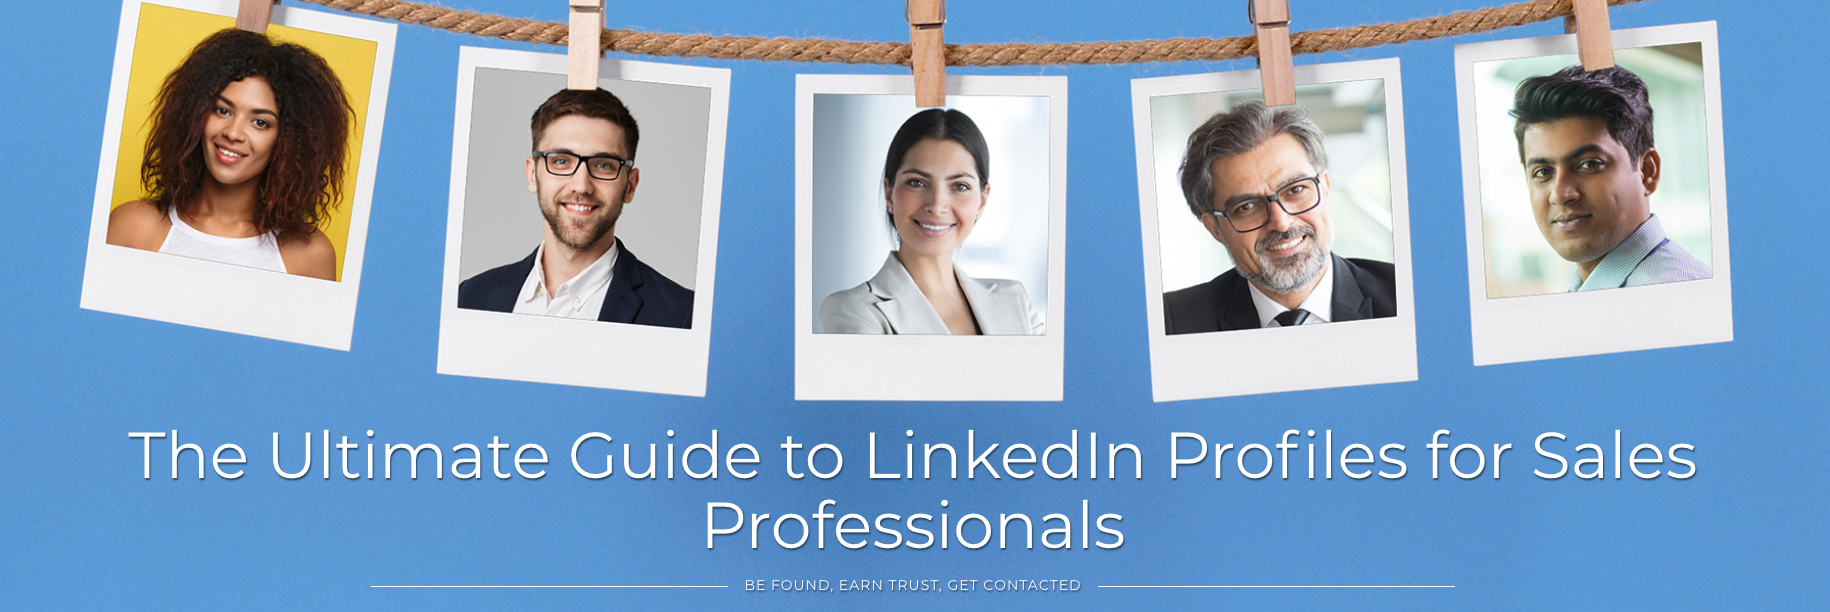 Download The Ultimate Guide to LinkedIn Profiles for Sales Professionals